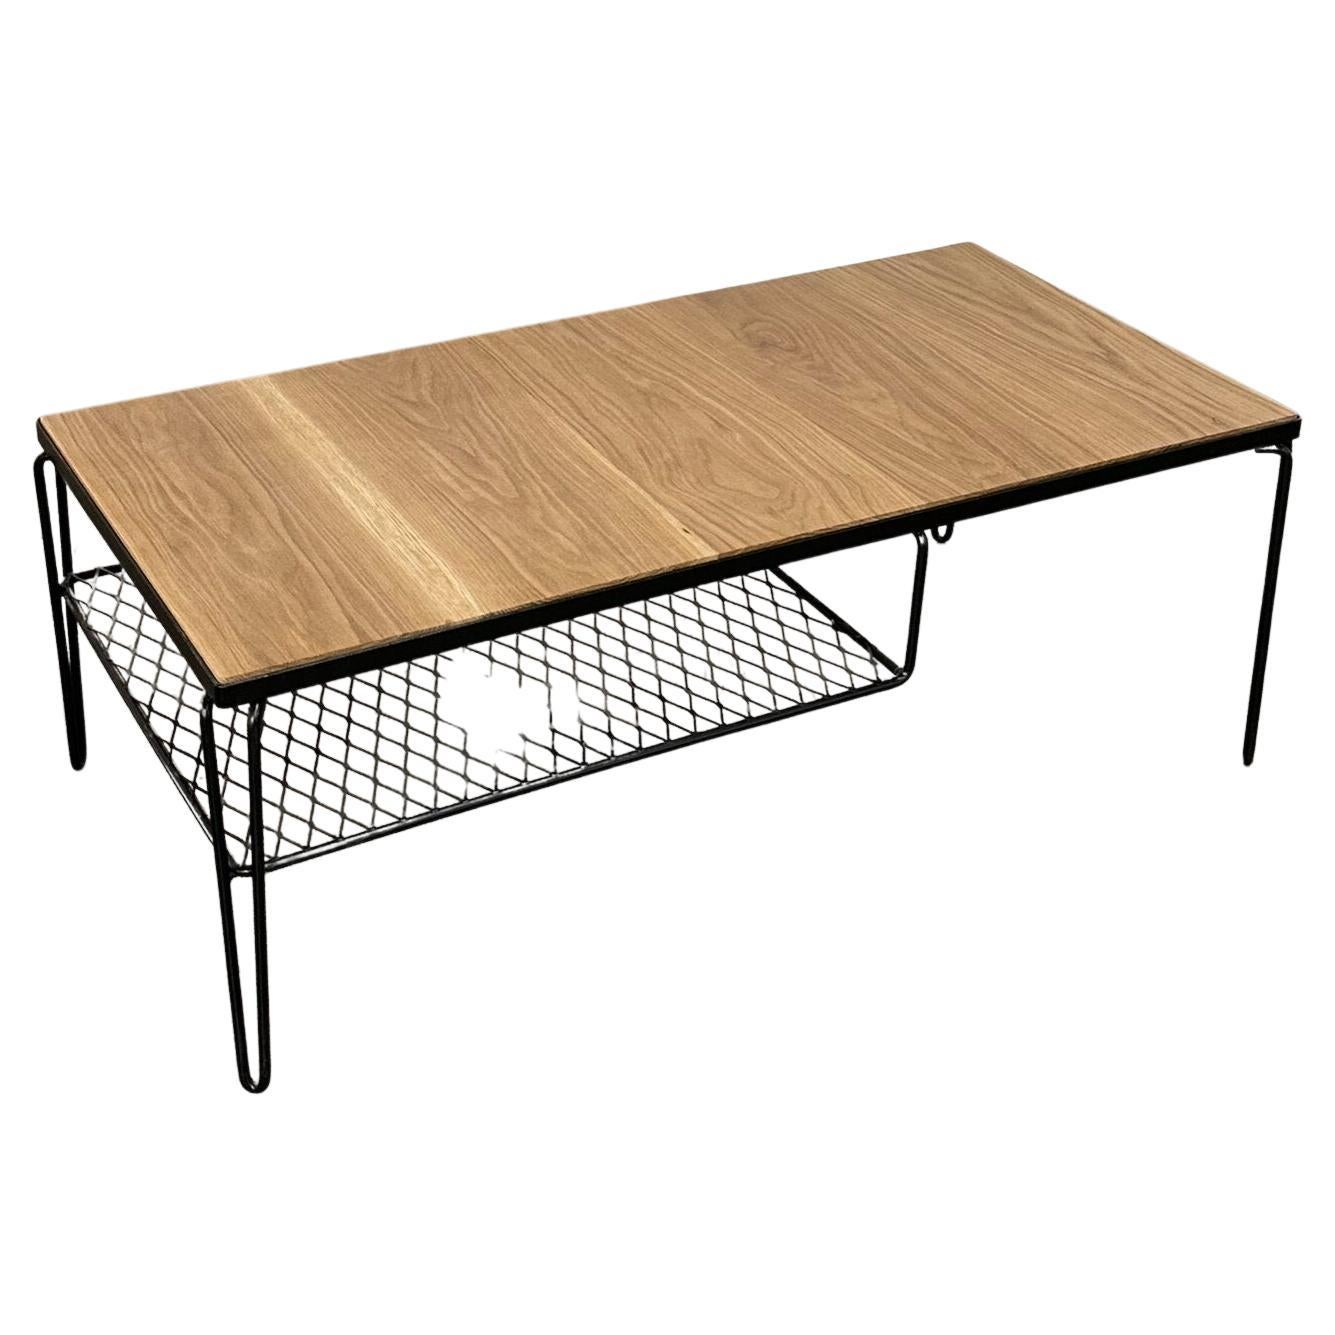 Atomic iron and oak coffee table For Sale